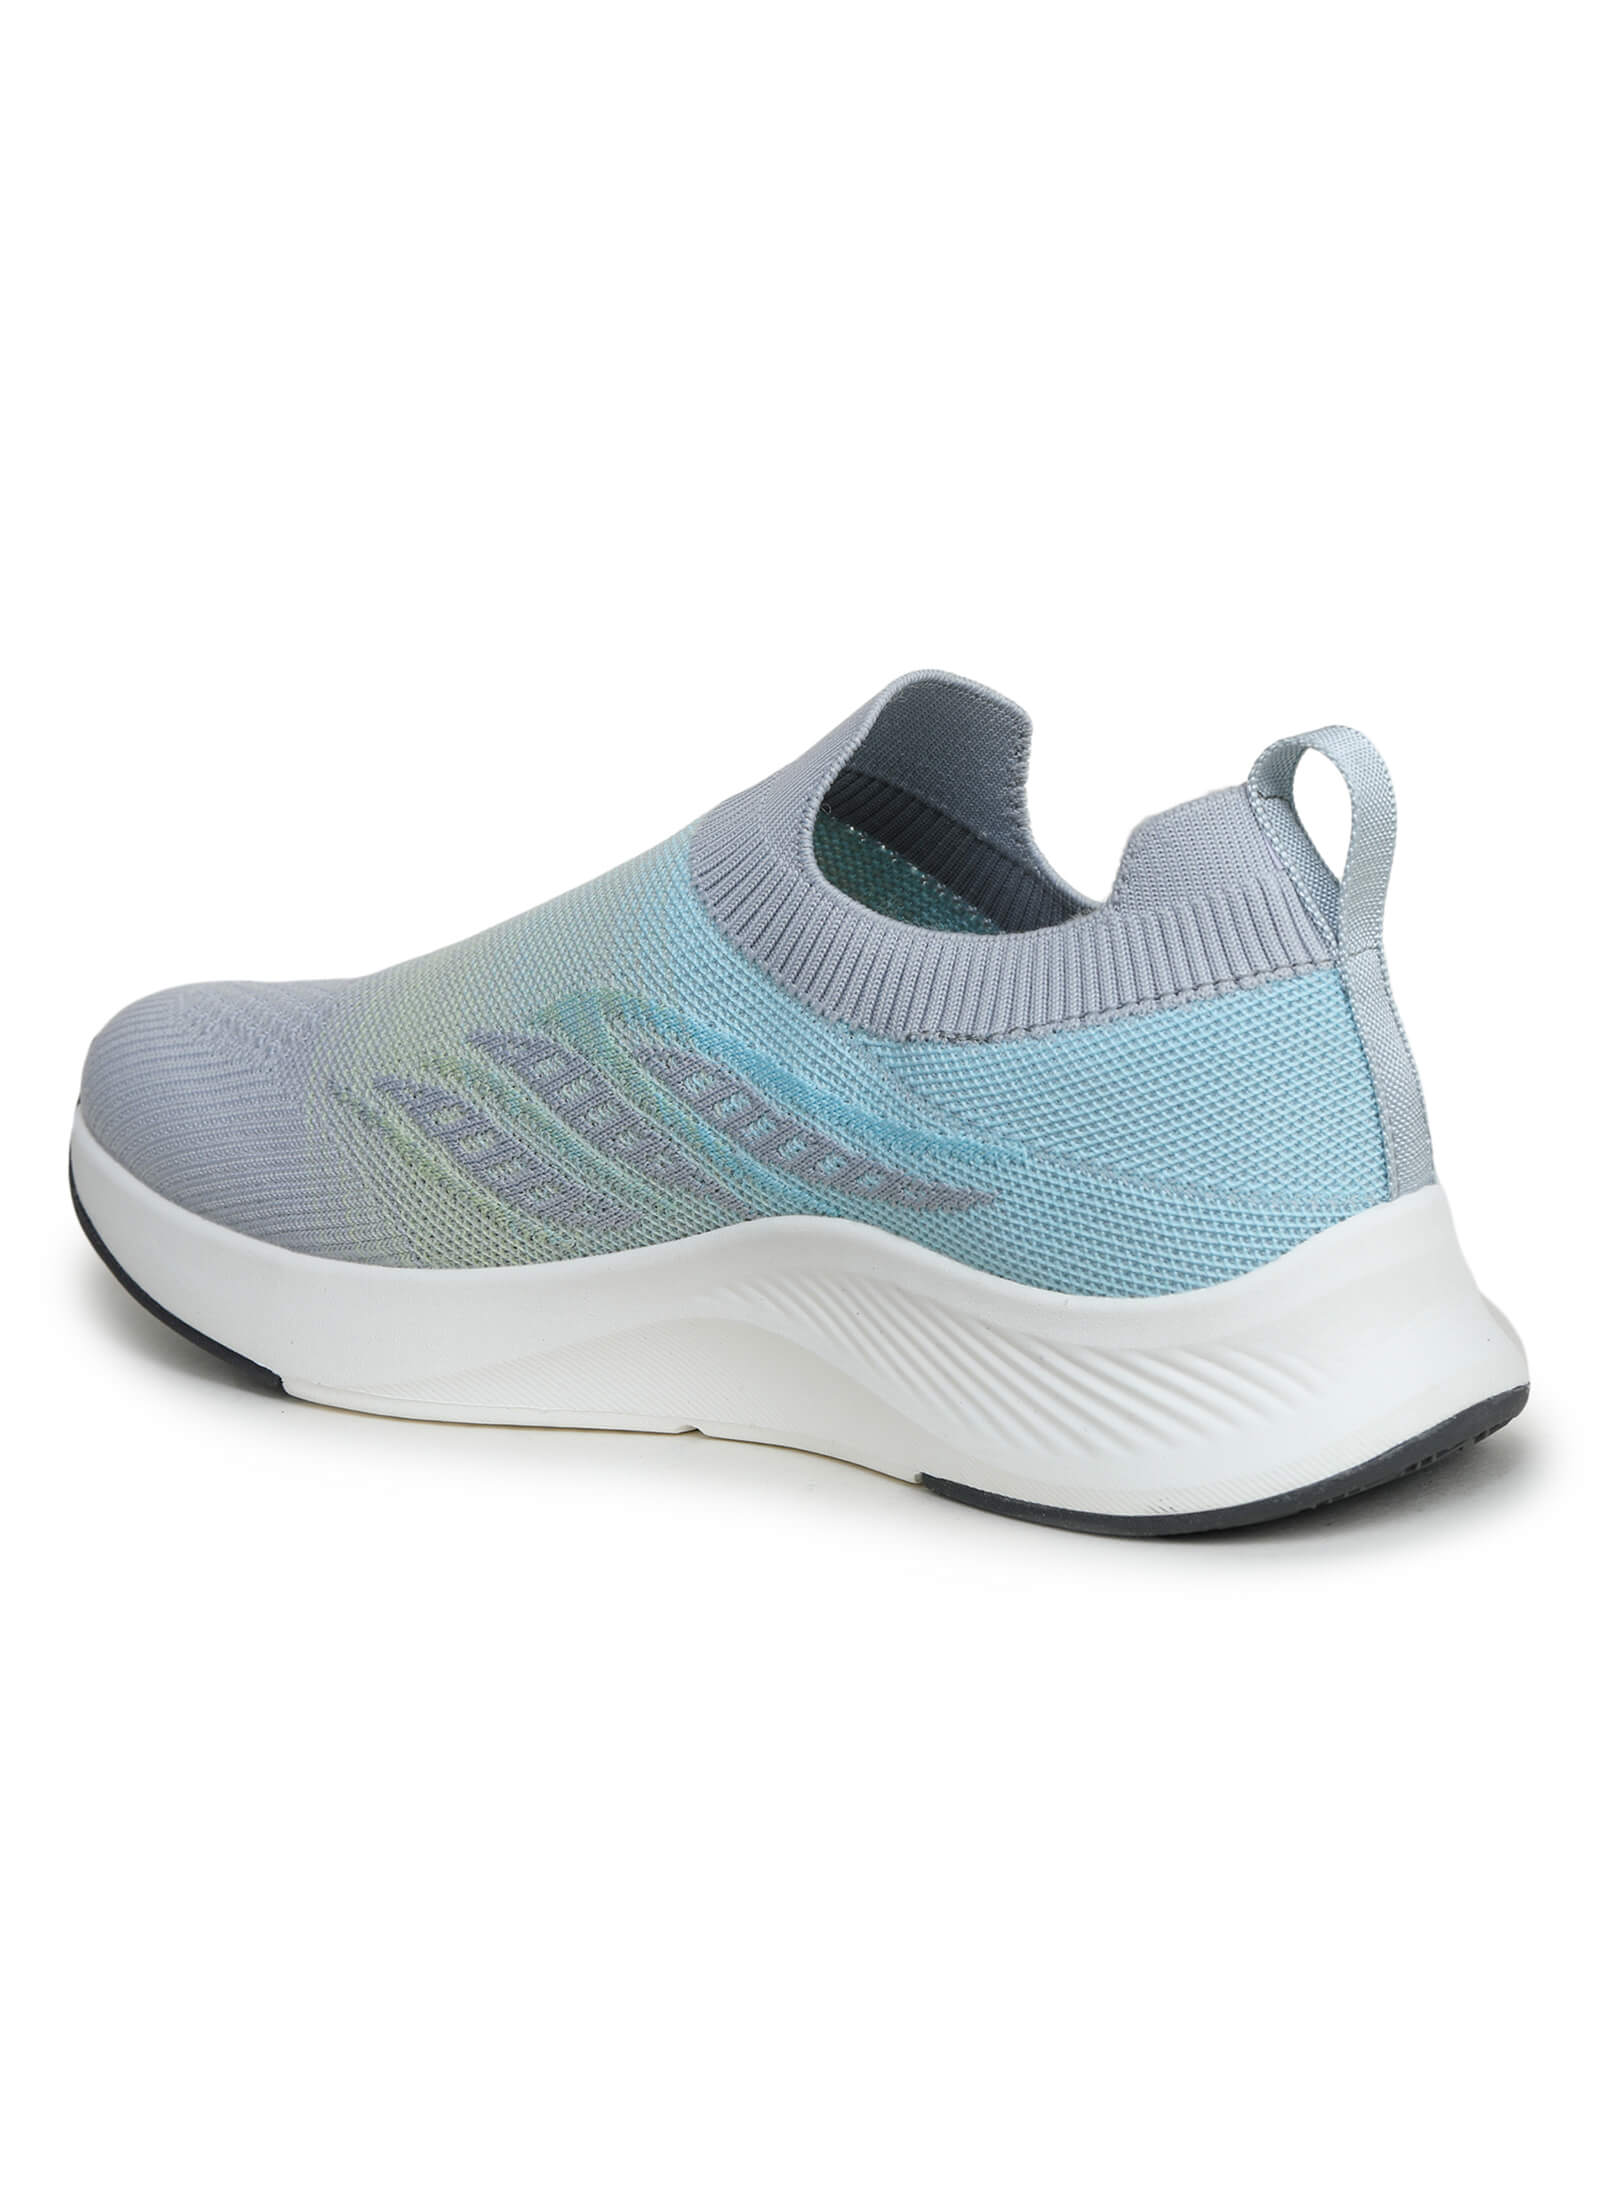 Honor Sports Shoes For Men